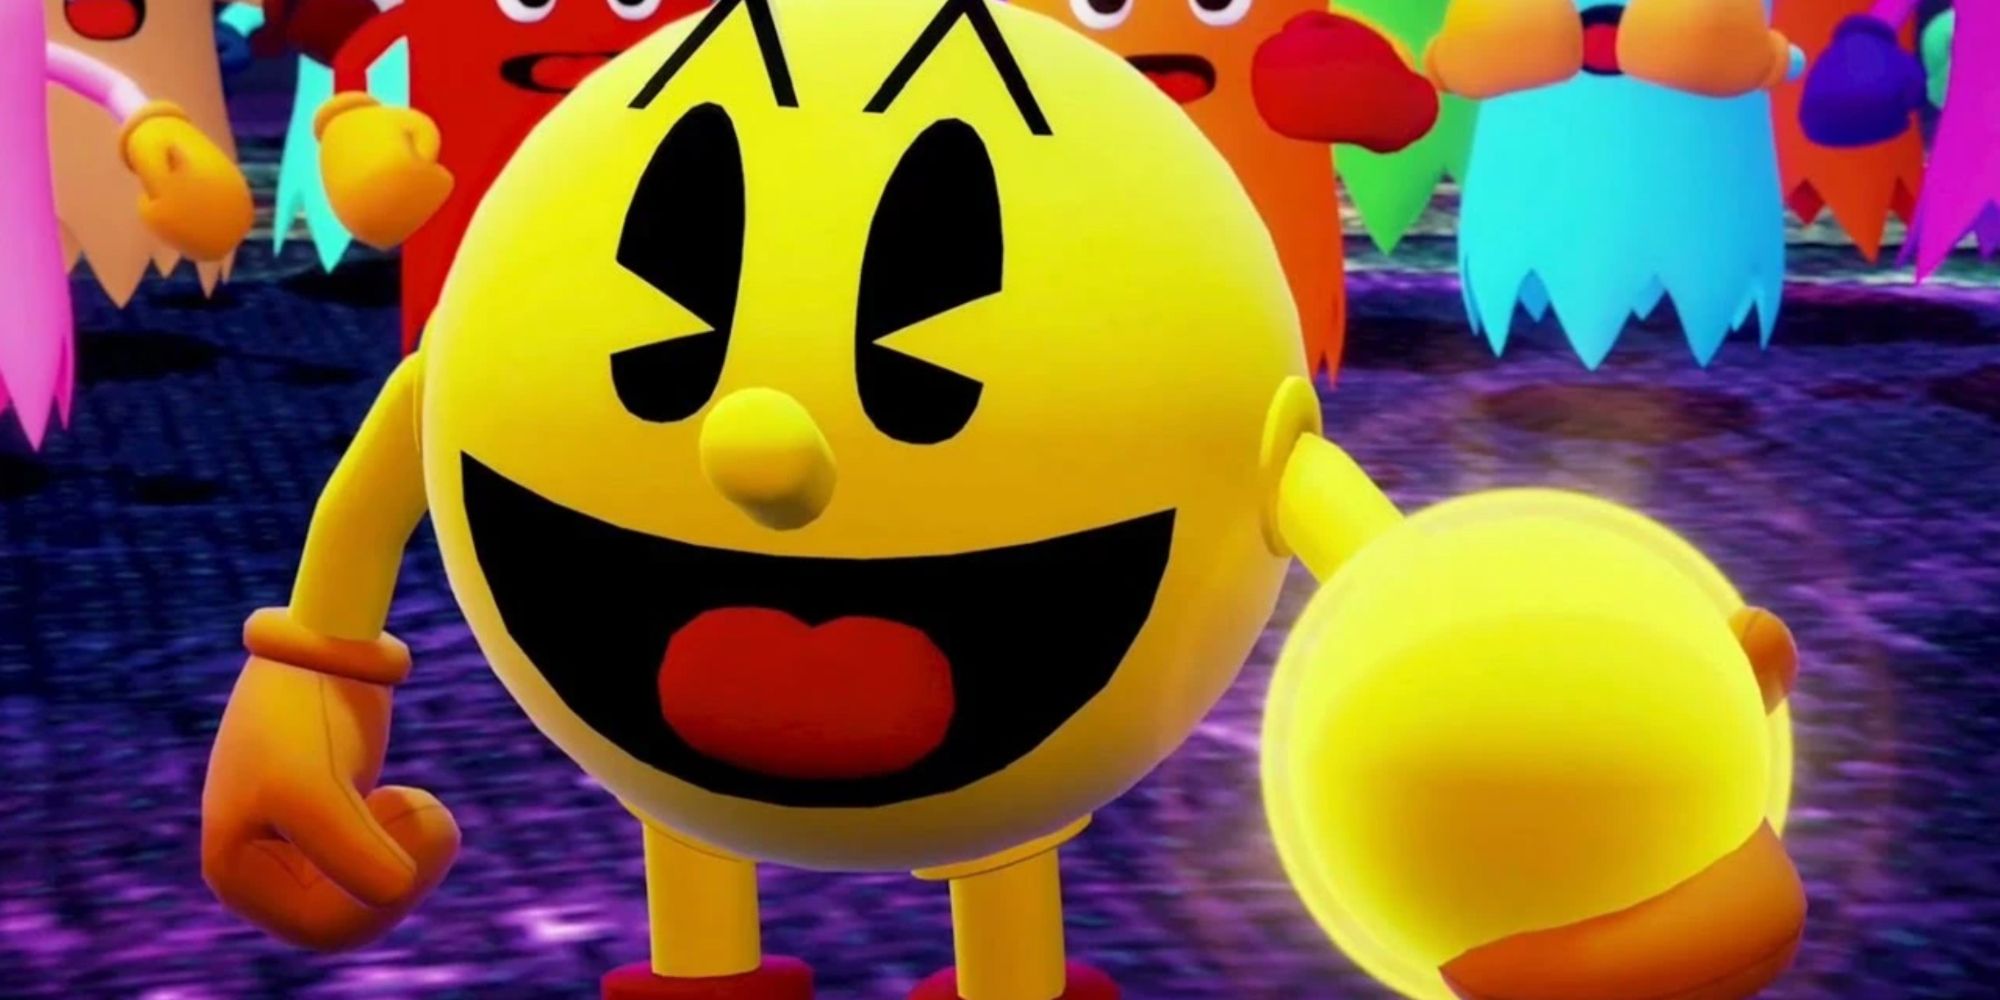 Pac-Man Holding A Power Pellet While Surrounded By Ghost